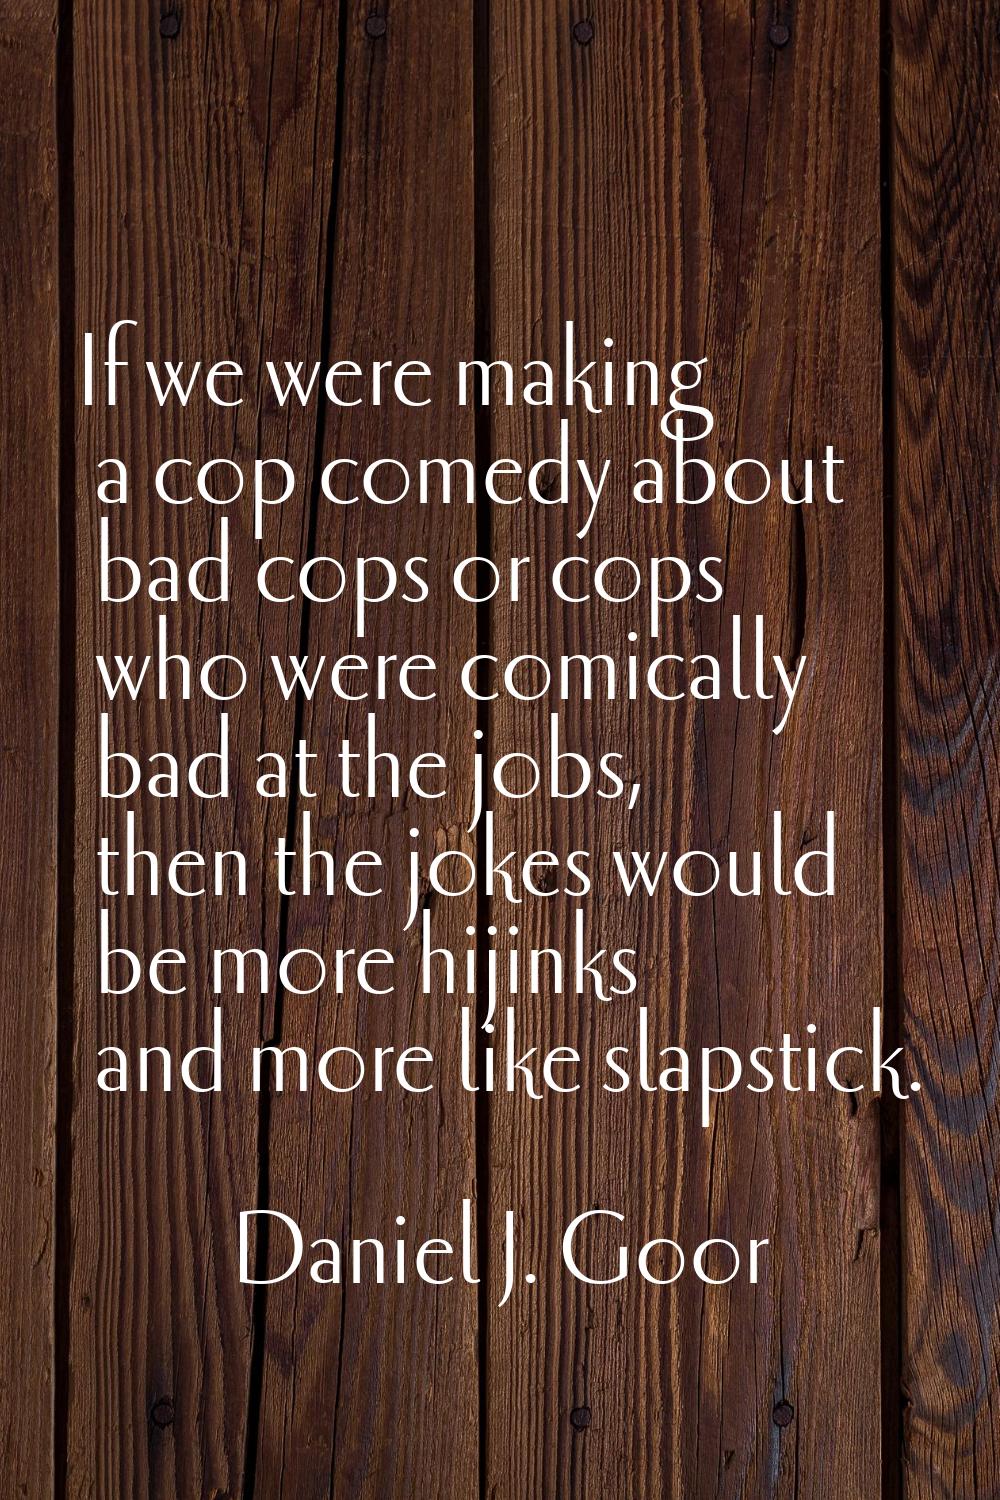 If we were making a cop comedy about bad cops or cops who were comically bad at the jobs, then the 